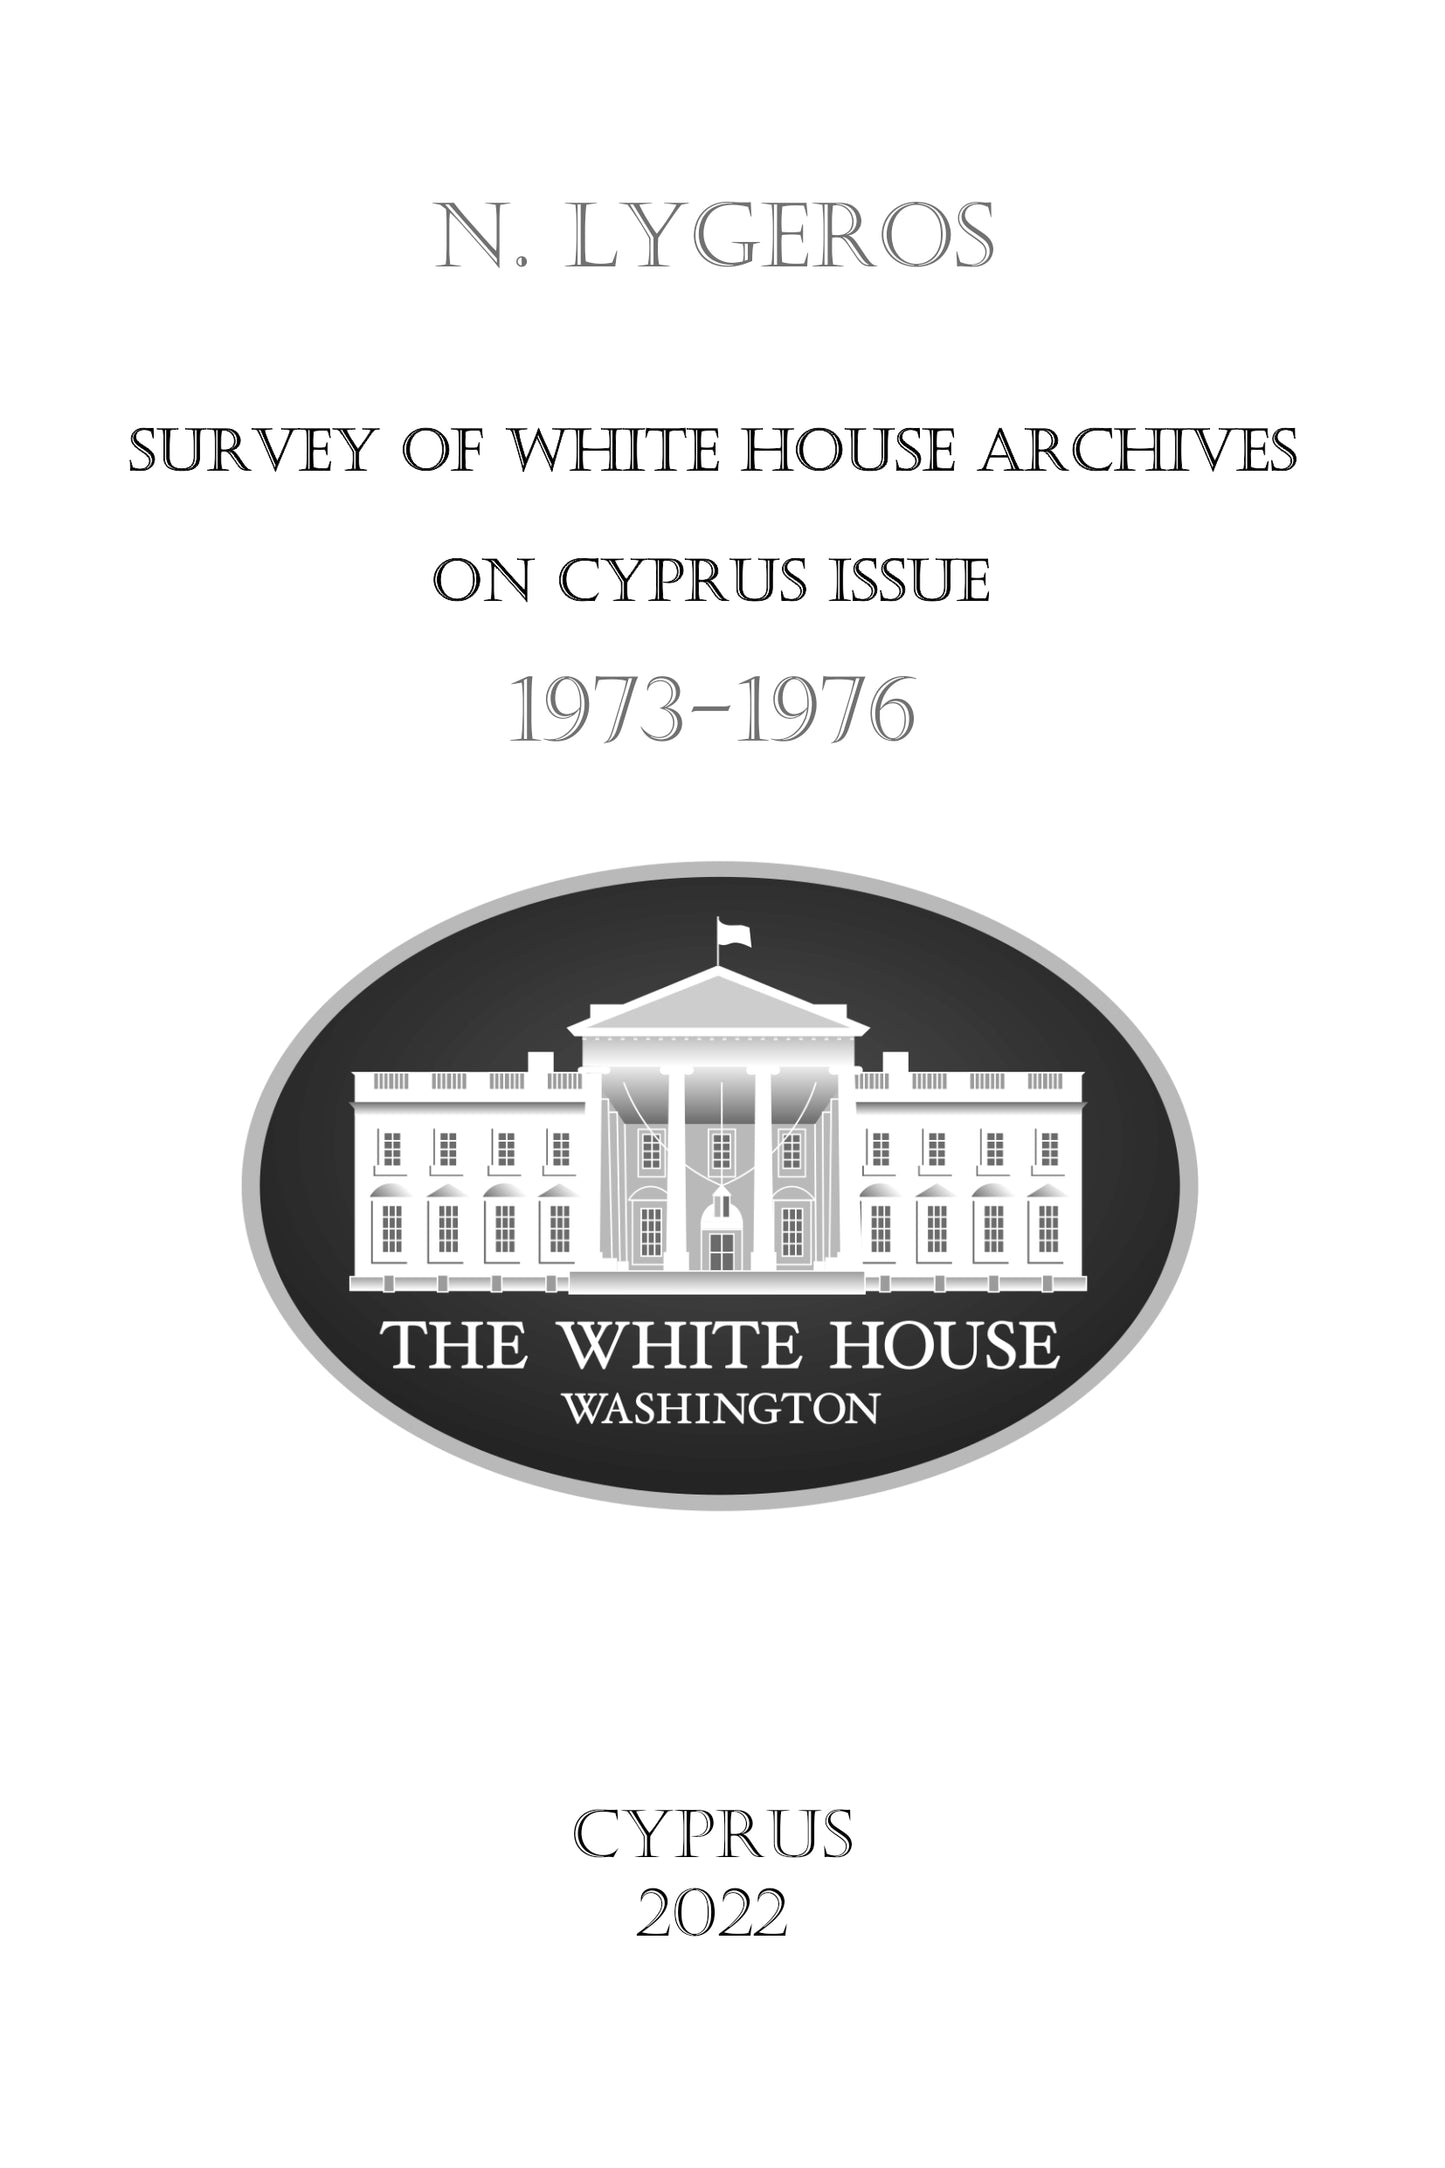 Survey of White House Archives on Cyprus Issue 1973-1976